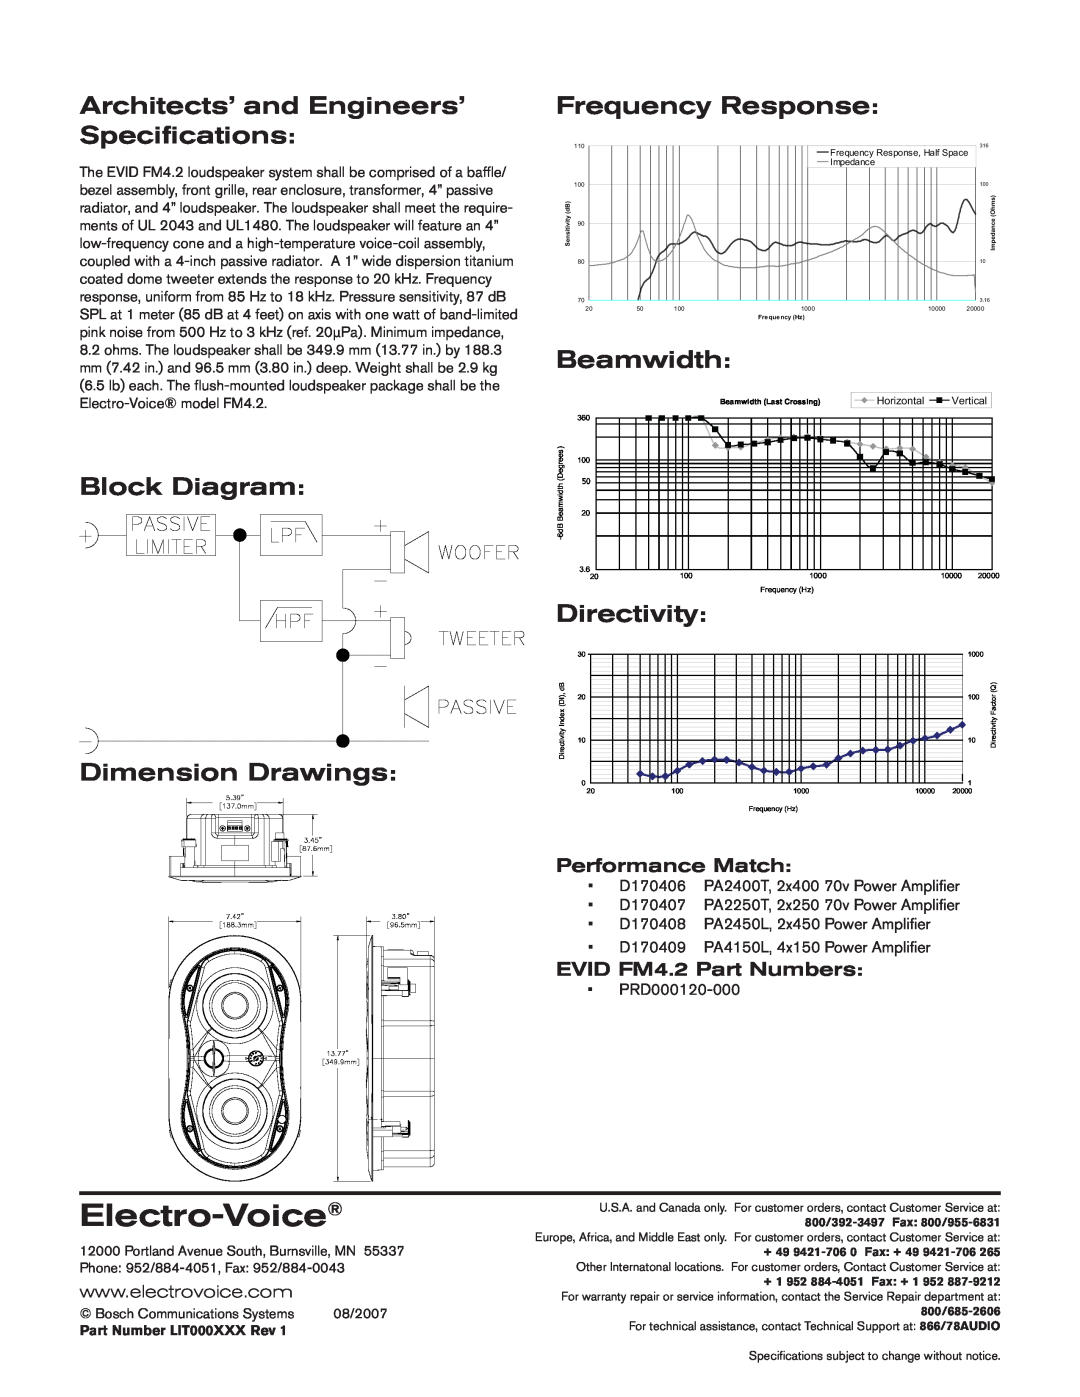 Electro-Voice EVID FM4.2 Architects’ and Engineers’ Specifications, Block Diagram Dimension Drawings, Frequency Response 